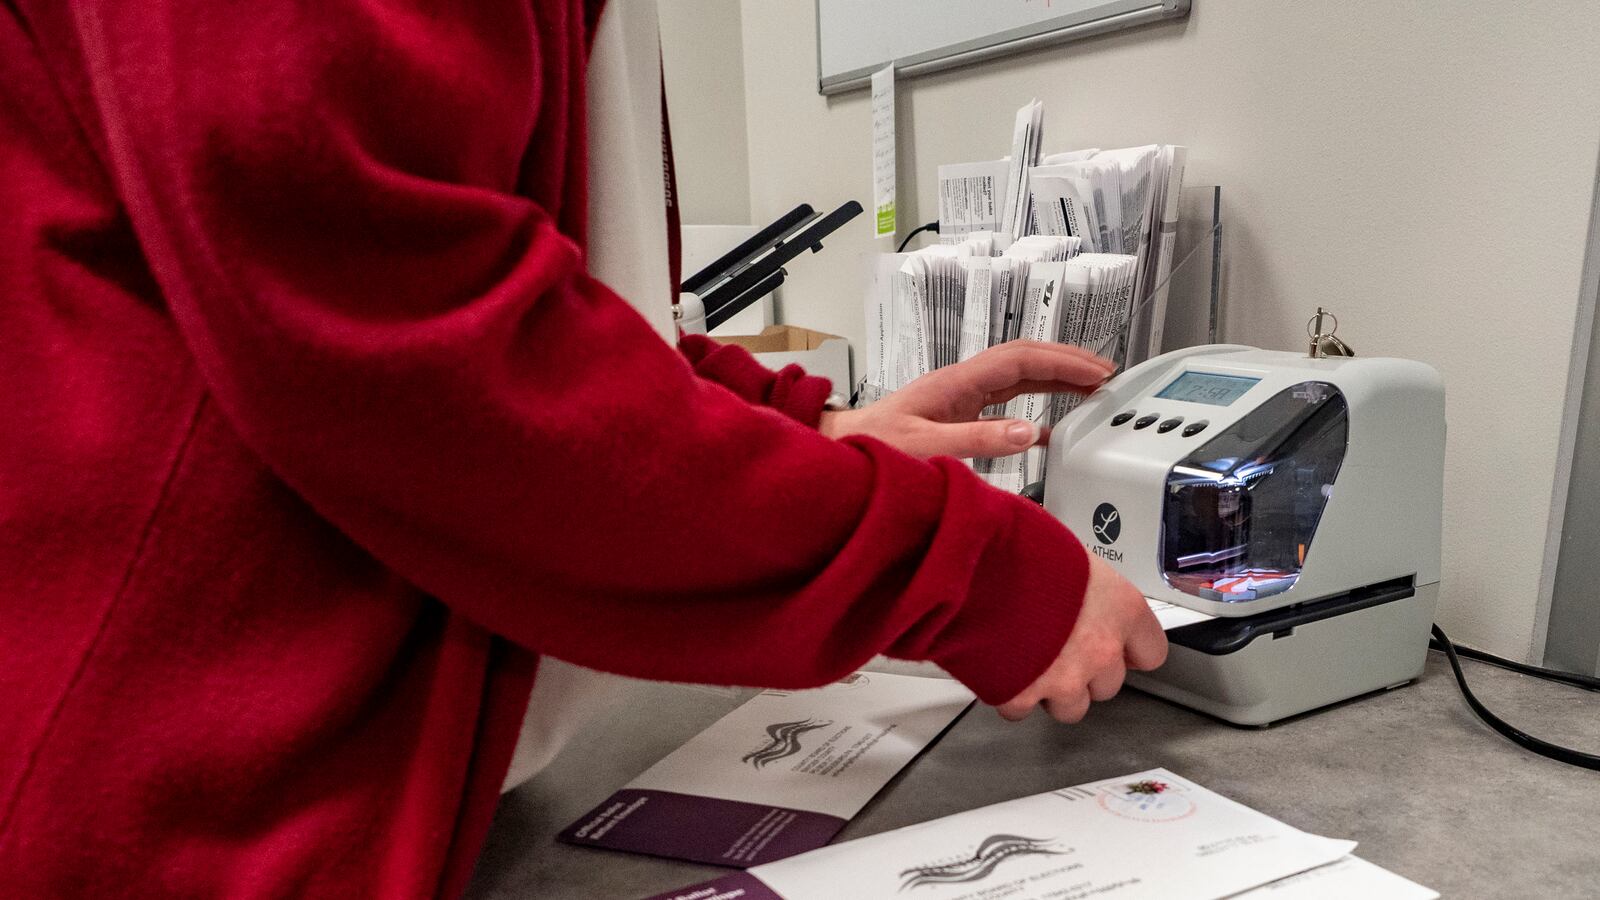 A person wearing a red sweater holds ballots and uses a small machine on a table.